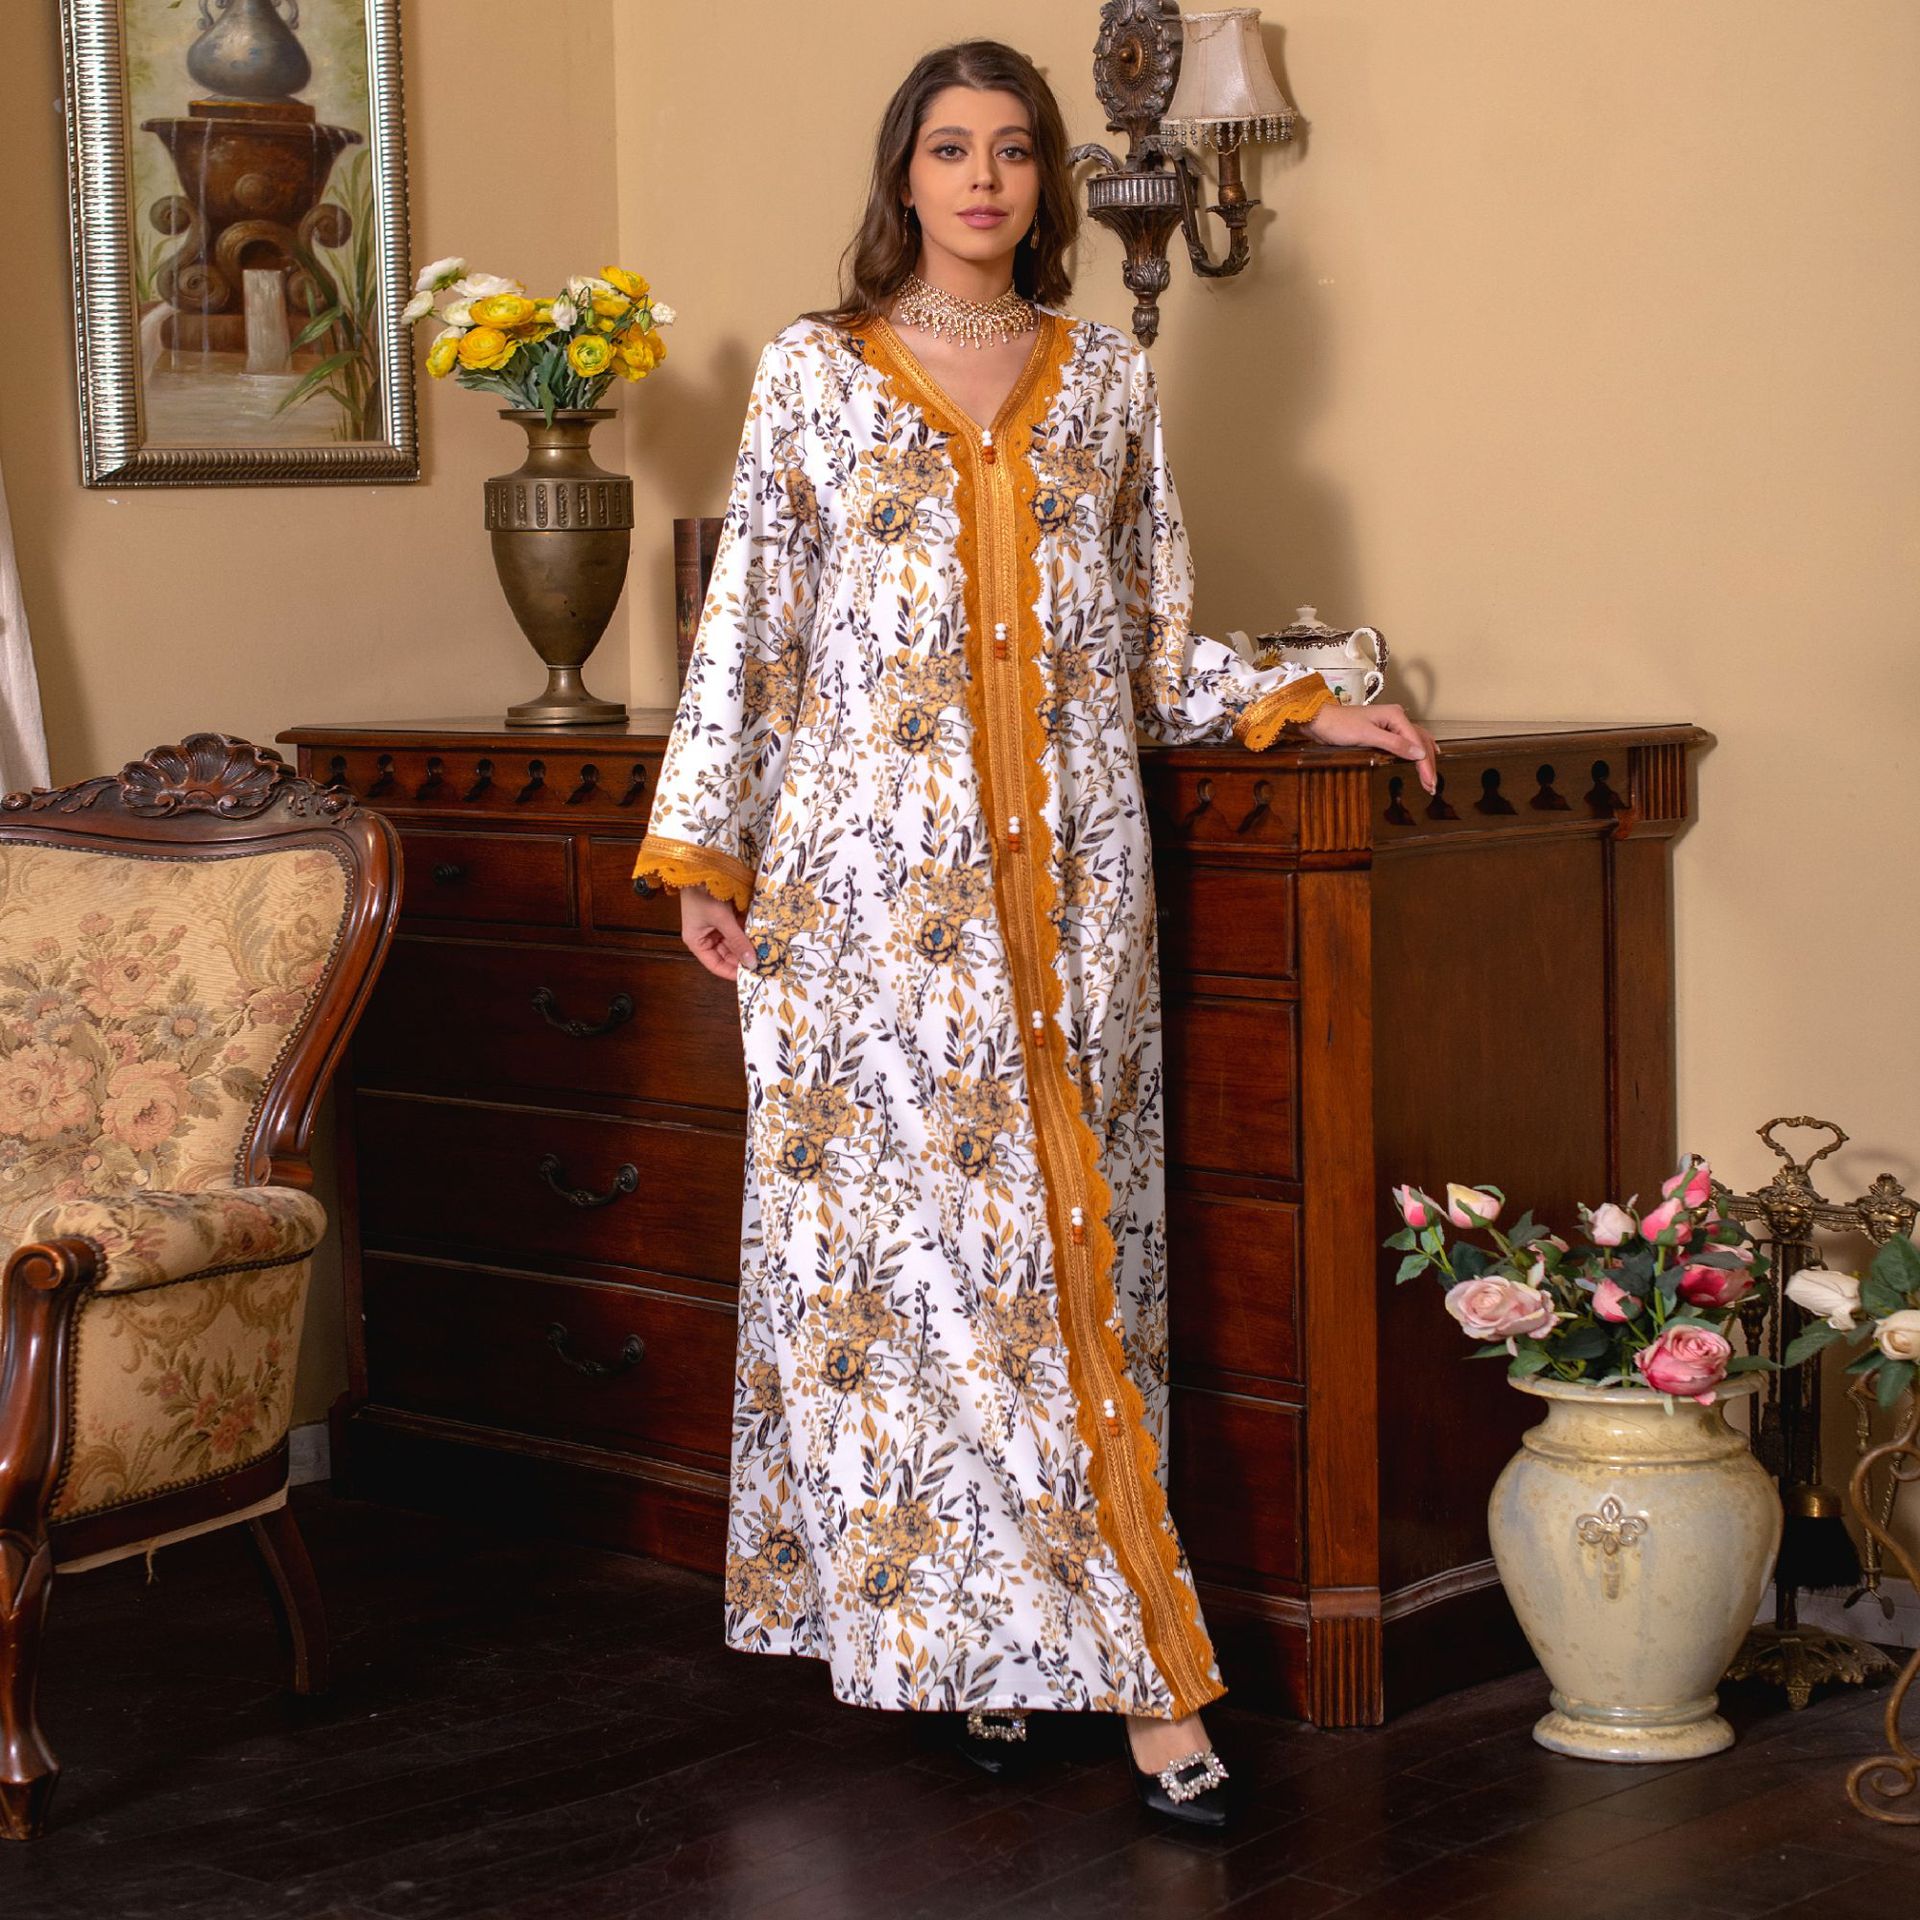 Jalabiya Immerse yourself in the comfort of a printed jalabiya | featuring a relaxed, flowy silhouette | intricate lace trimmings | and a casual yet stylish design